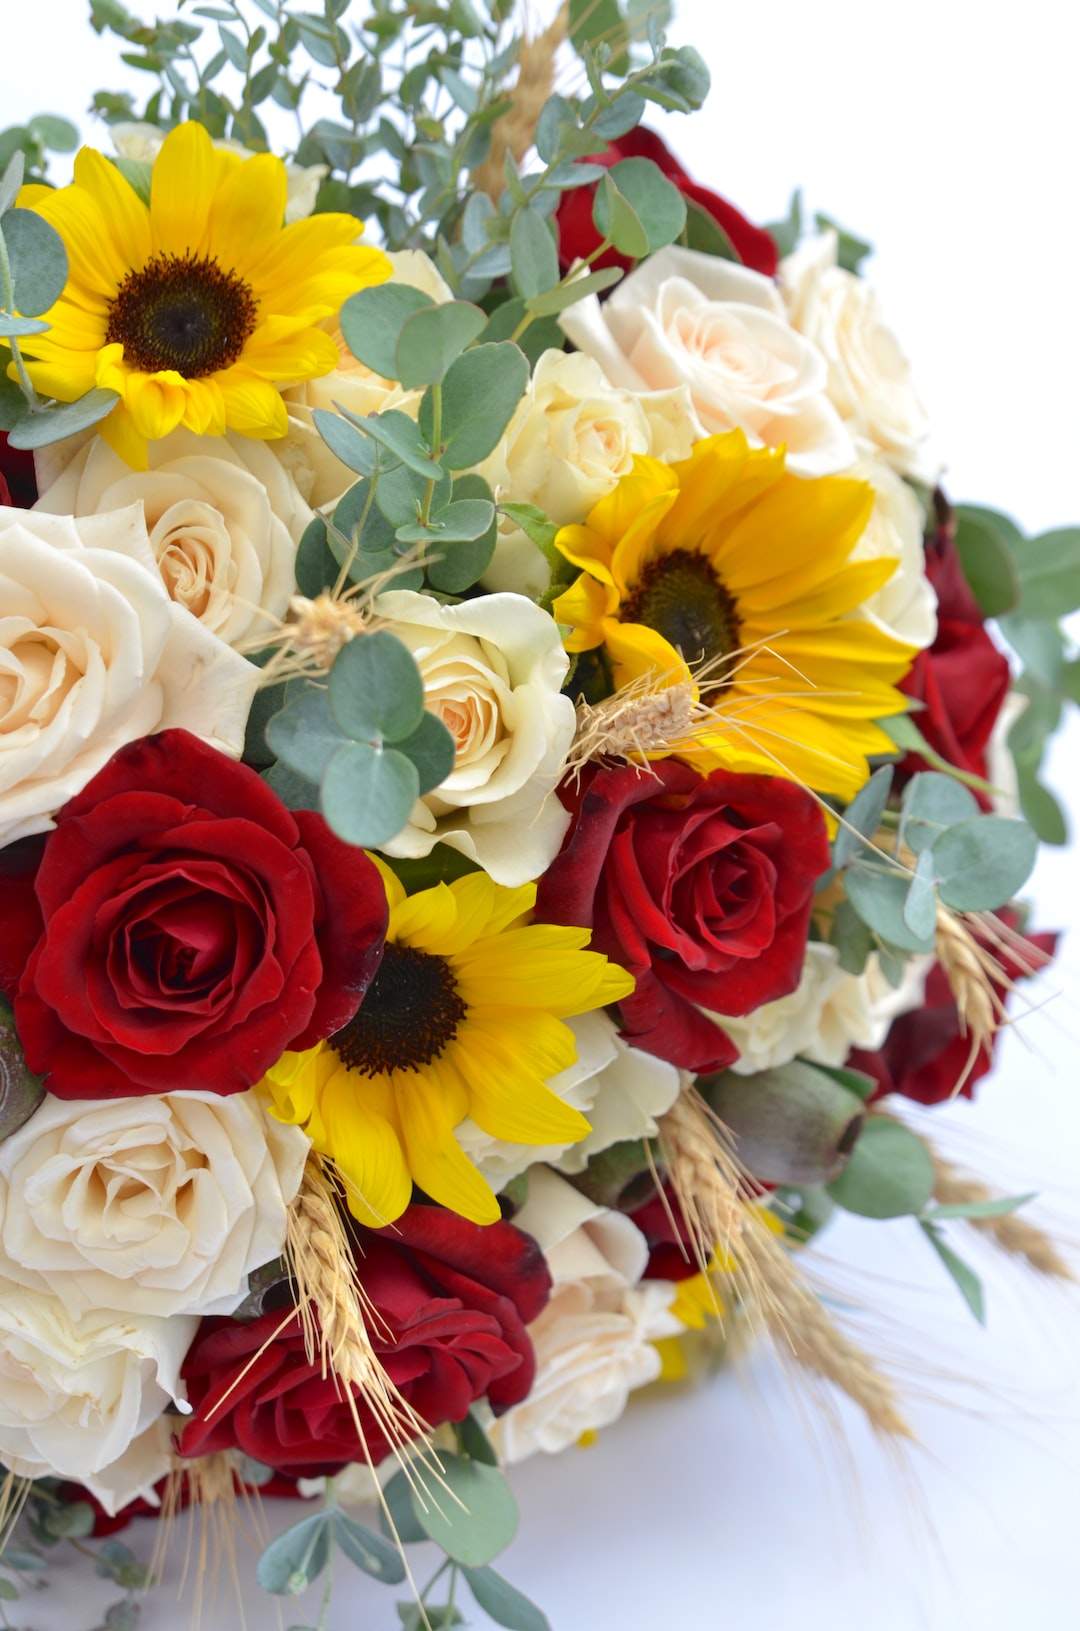 How Do I Choose the Best Flower Bouquet for an Upcoming Event?